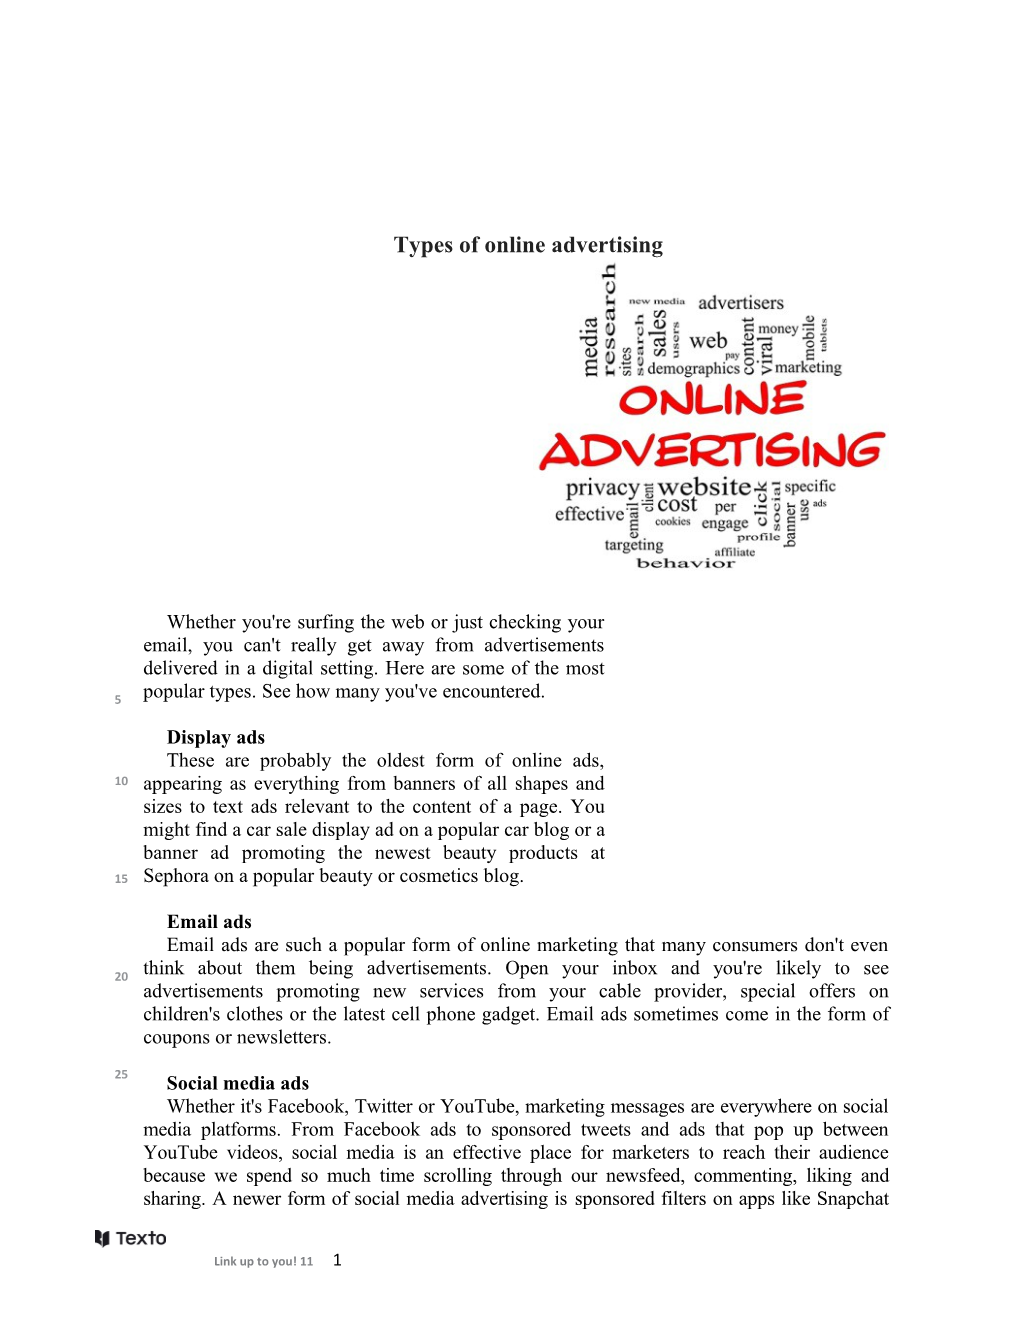 1.You Can Find Many Online Advertisements